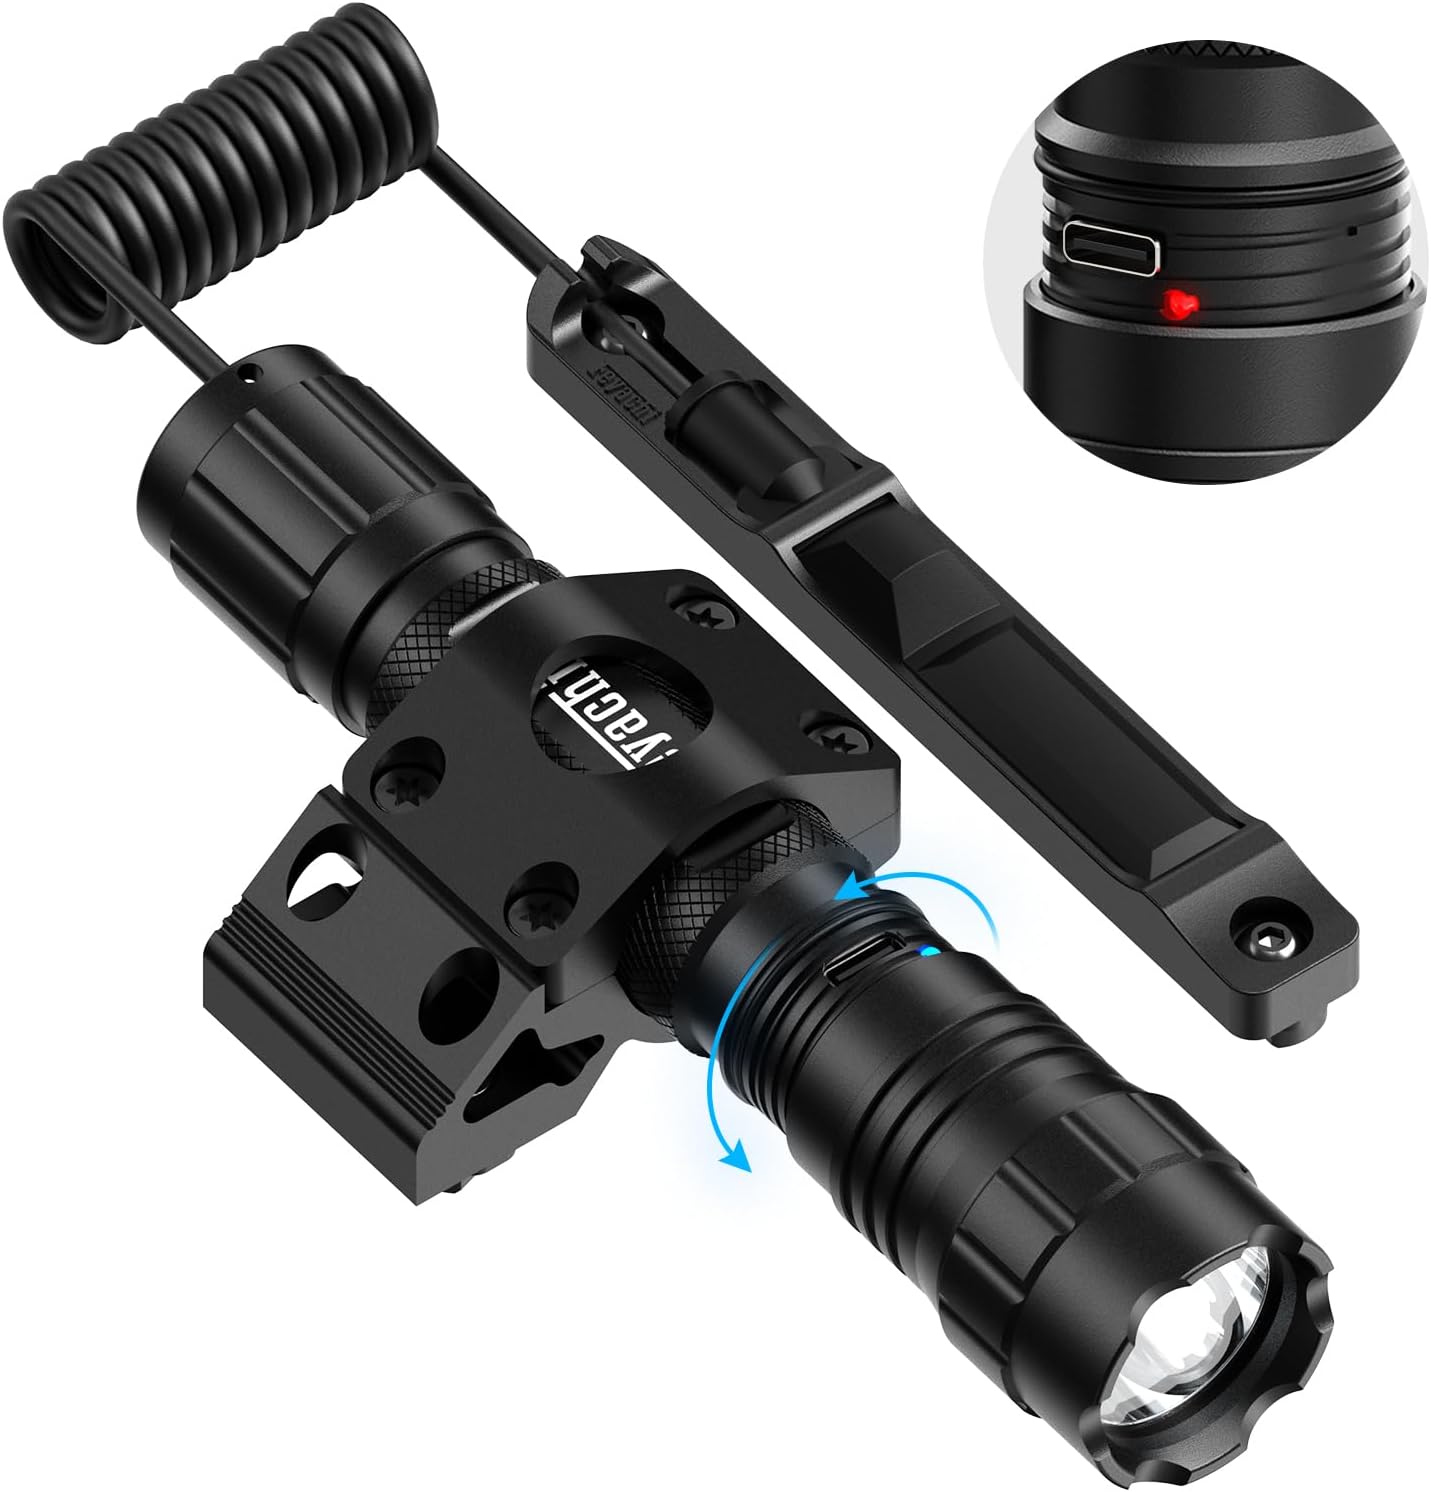 Feyachi Mlok-FL37 1500 Lumen Tactical Flashlight Rechargeable IPX7 Protection 4 Modes LED Weapon Light Mlok Flashlight Included with Pressure Switch